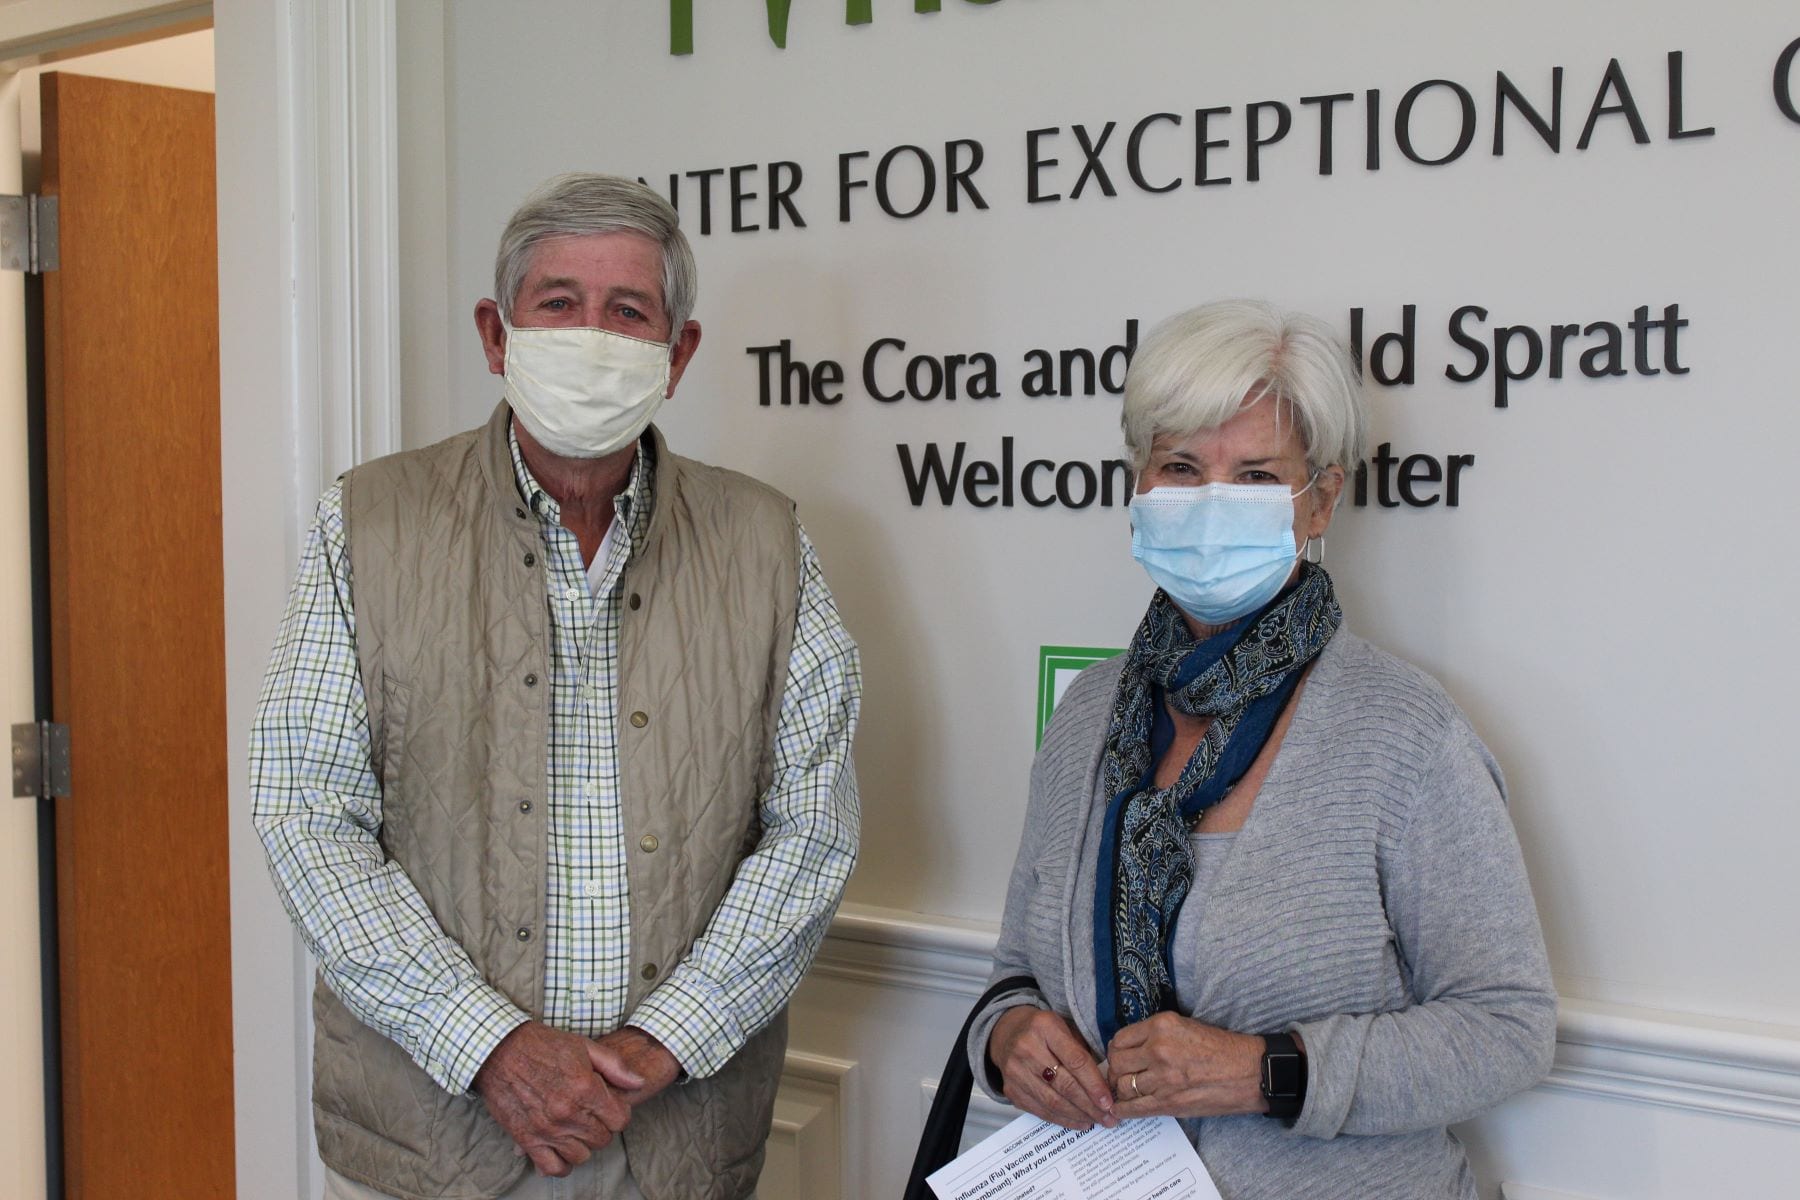 A man wearing a tan vest and a woman wearing a blue scarf await their flu shots in the RVNAhealth lobby